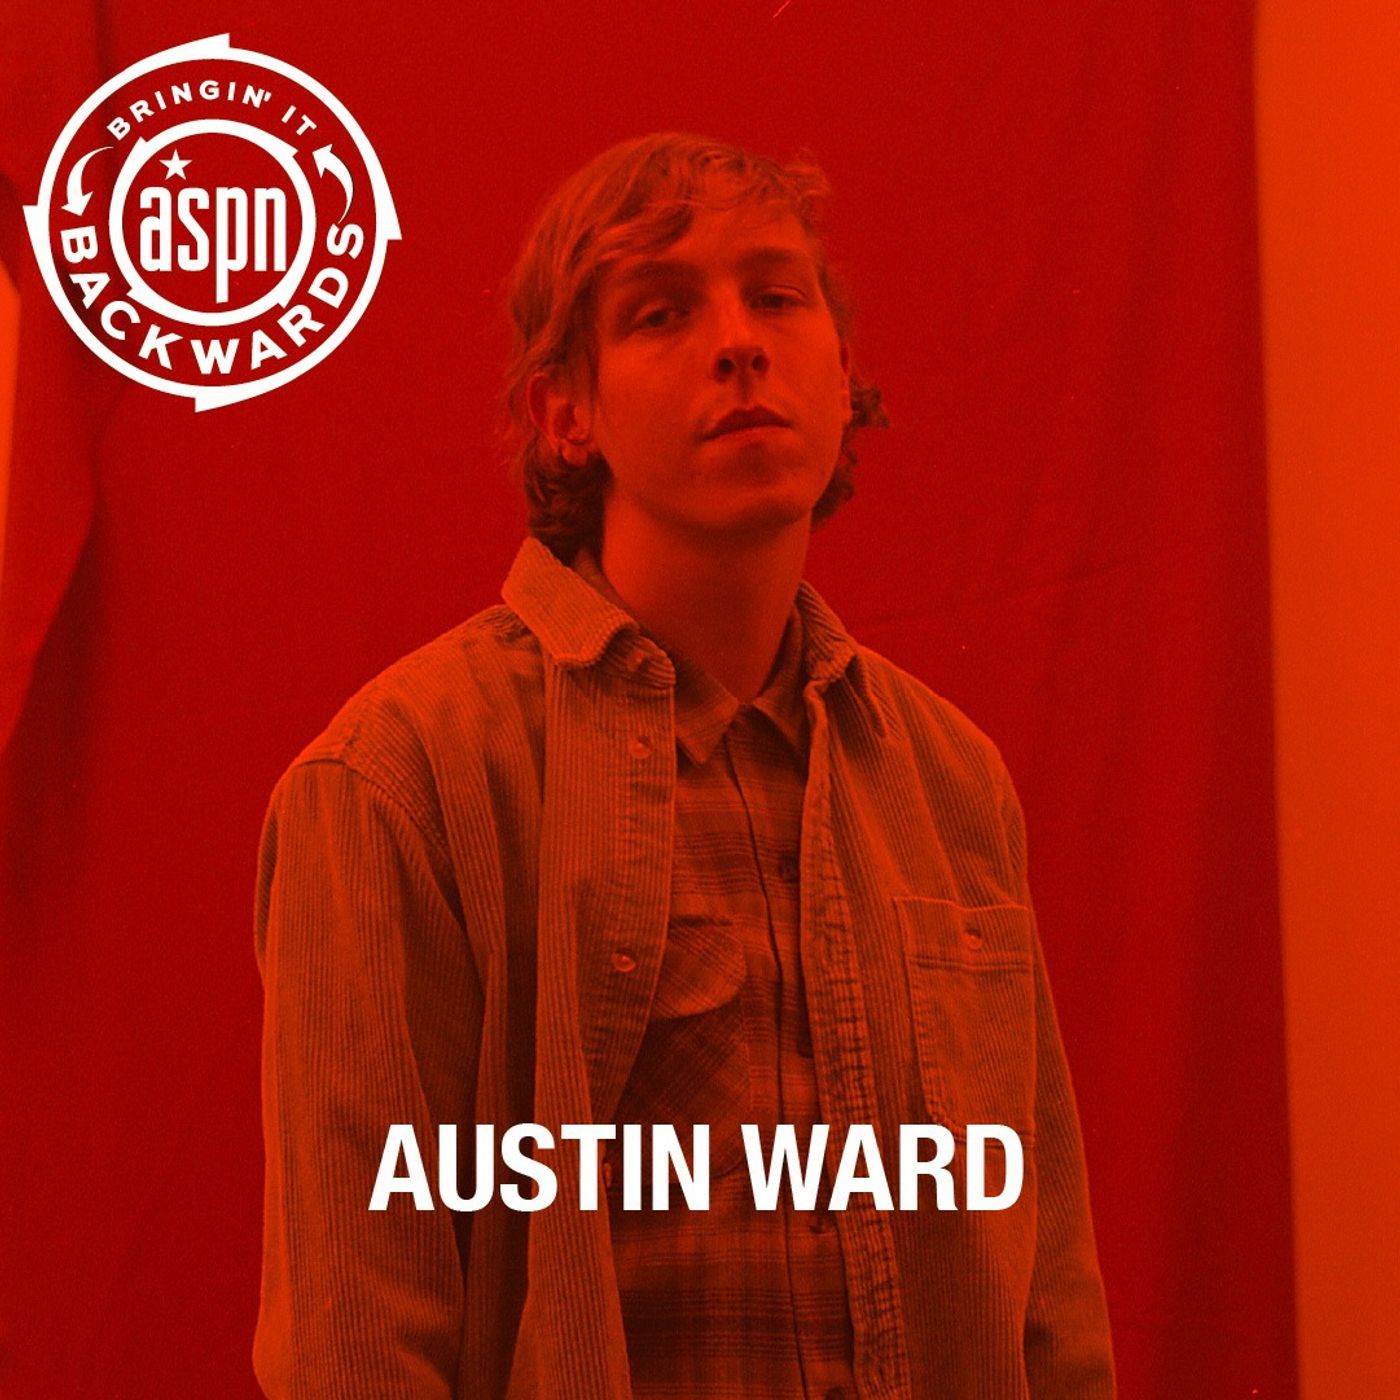 Interview with Austin Ward Image